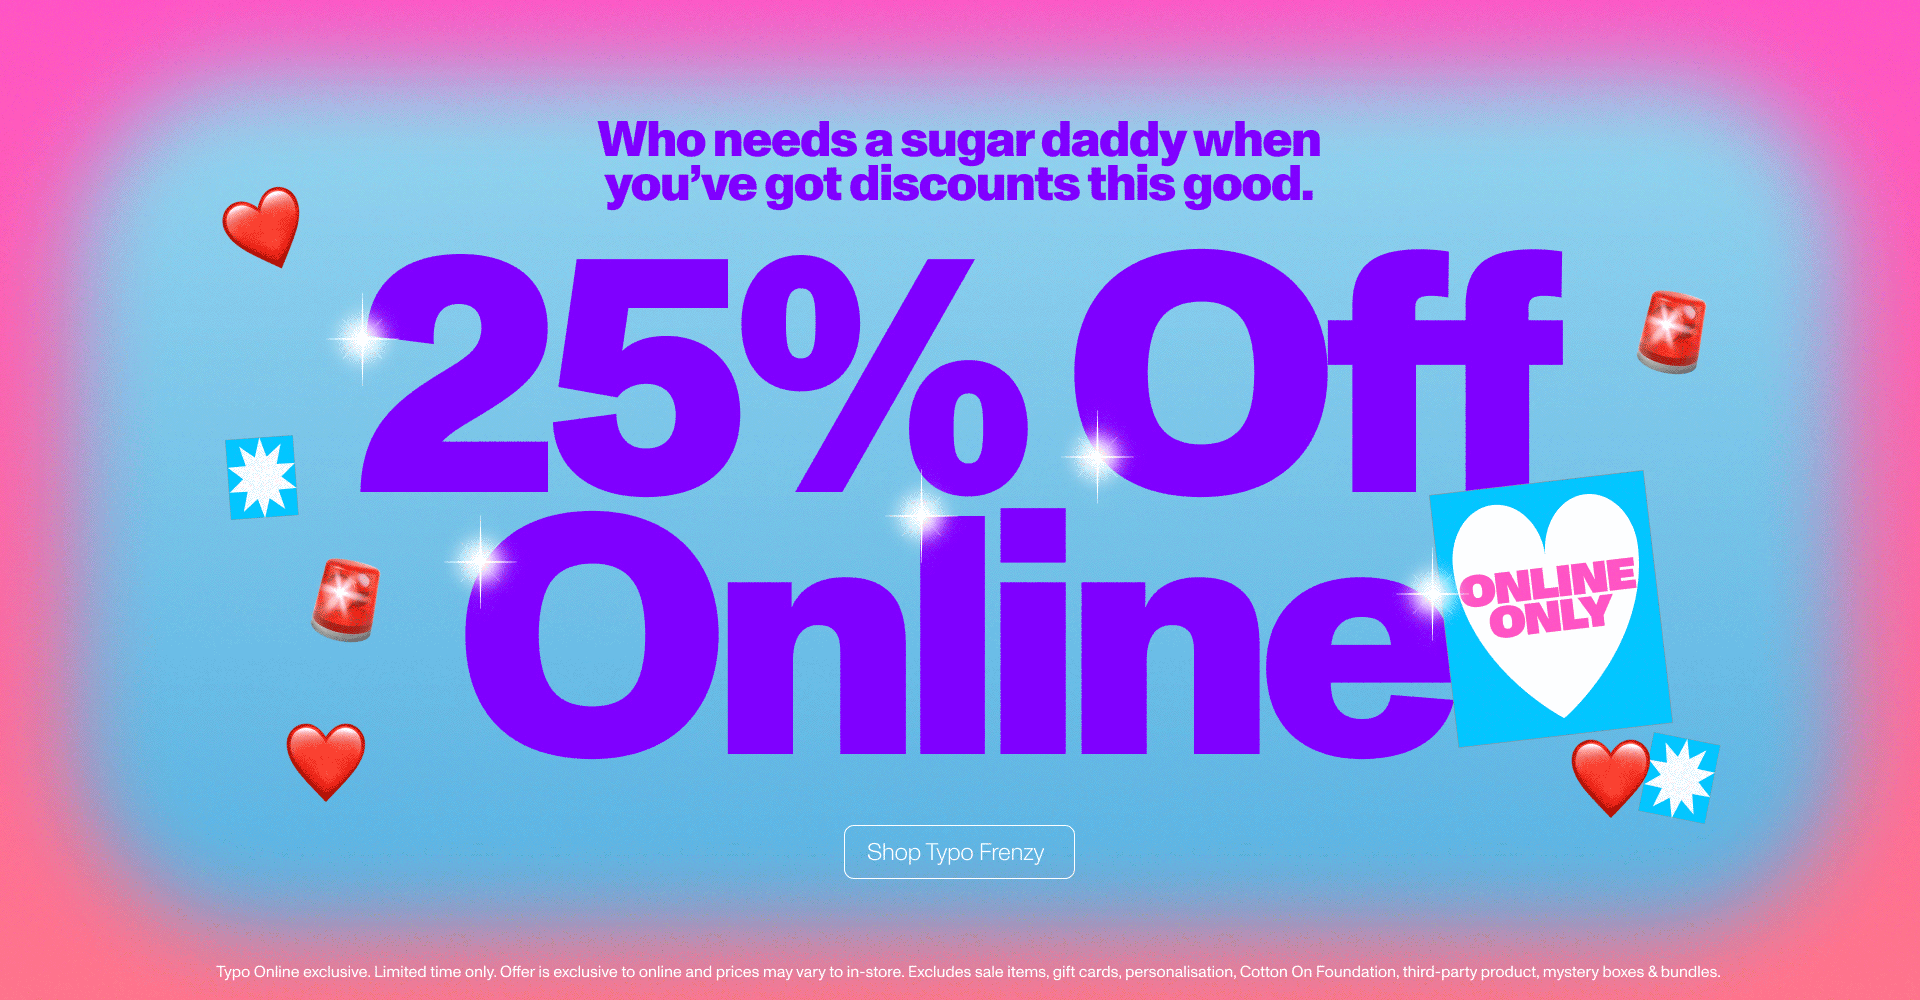 Who needs a sugar daddy when you've got discounts this good. 25% off online. Online only. Shop typo frenzy.